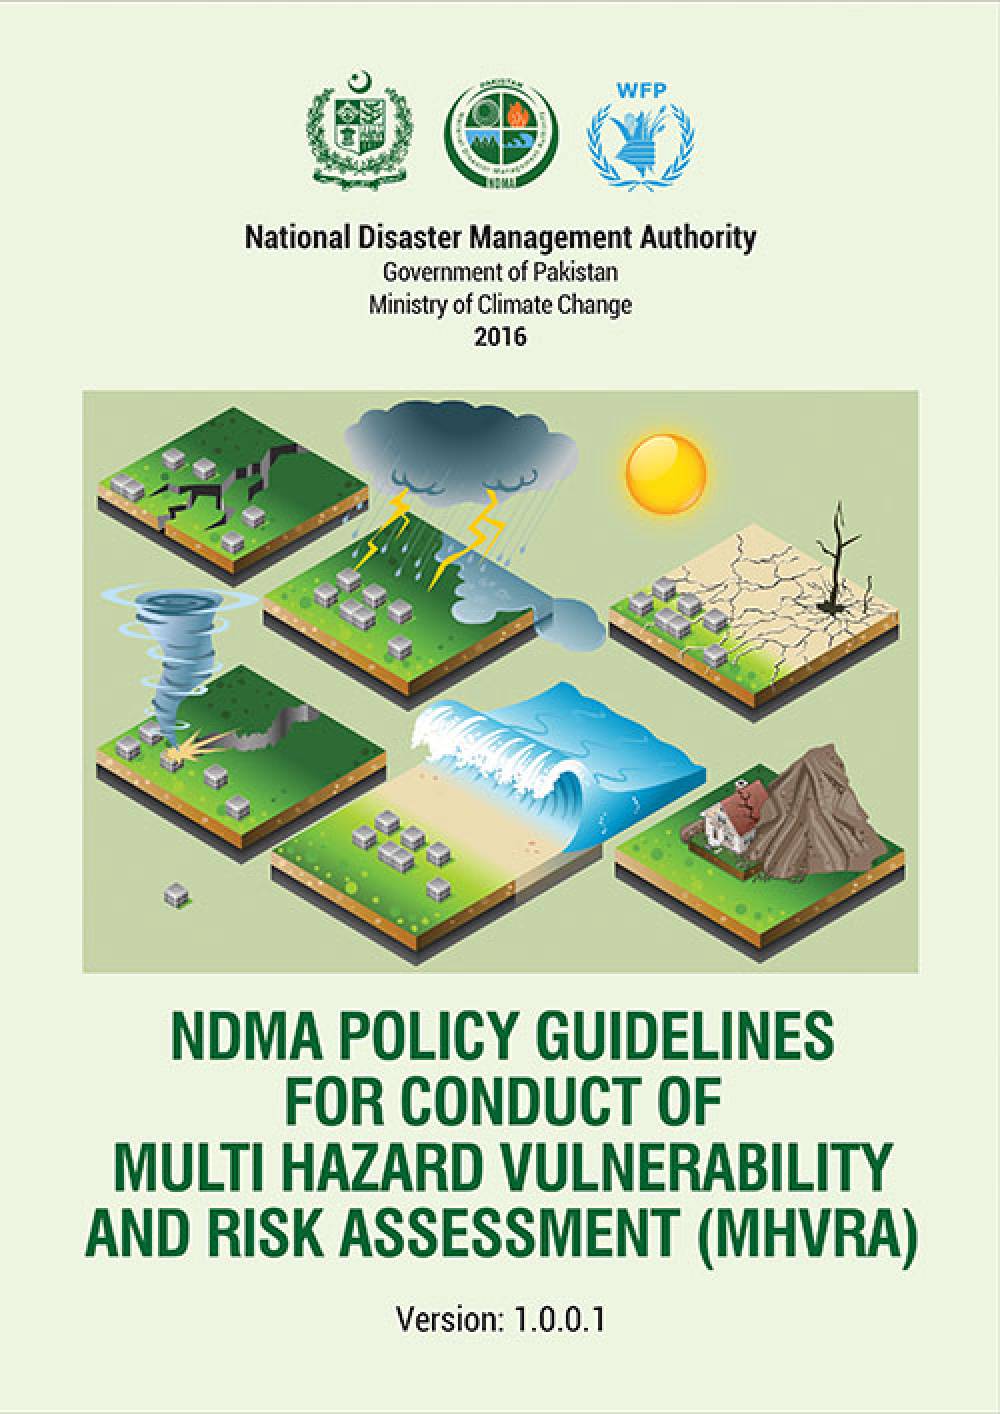 NDMA POLICY GUIDELINES FOR CONDUCT OF MULTI HAZARD VULNERABILITY AND RISK ASSESSMENT (9A)